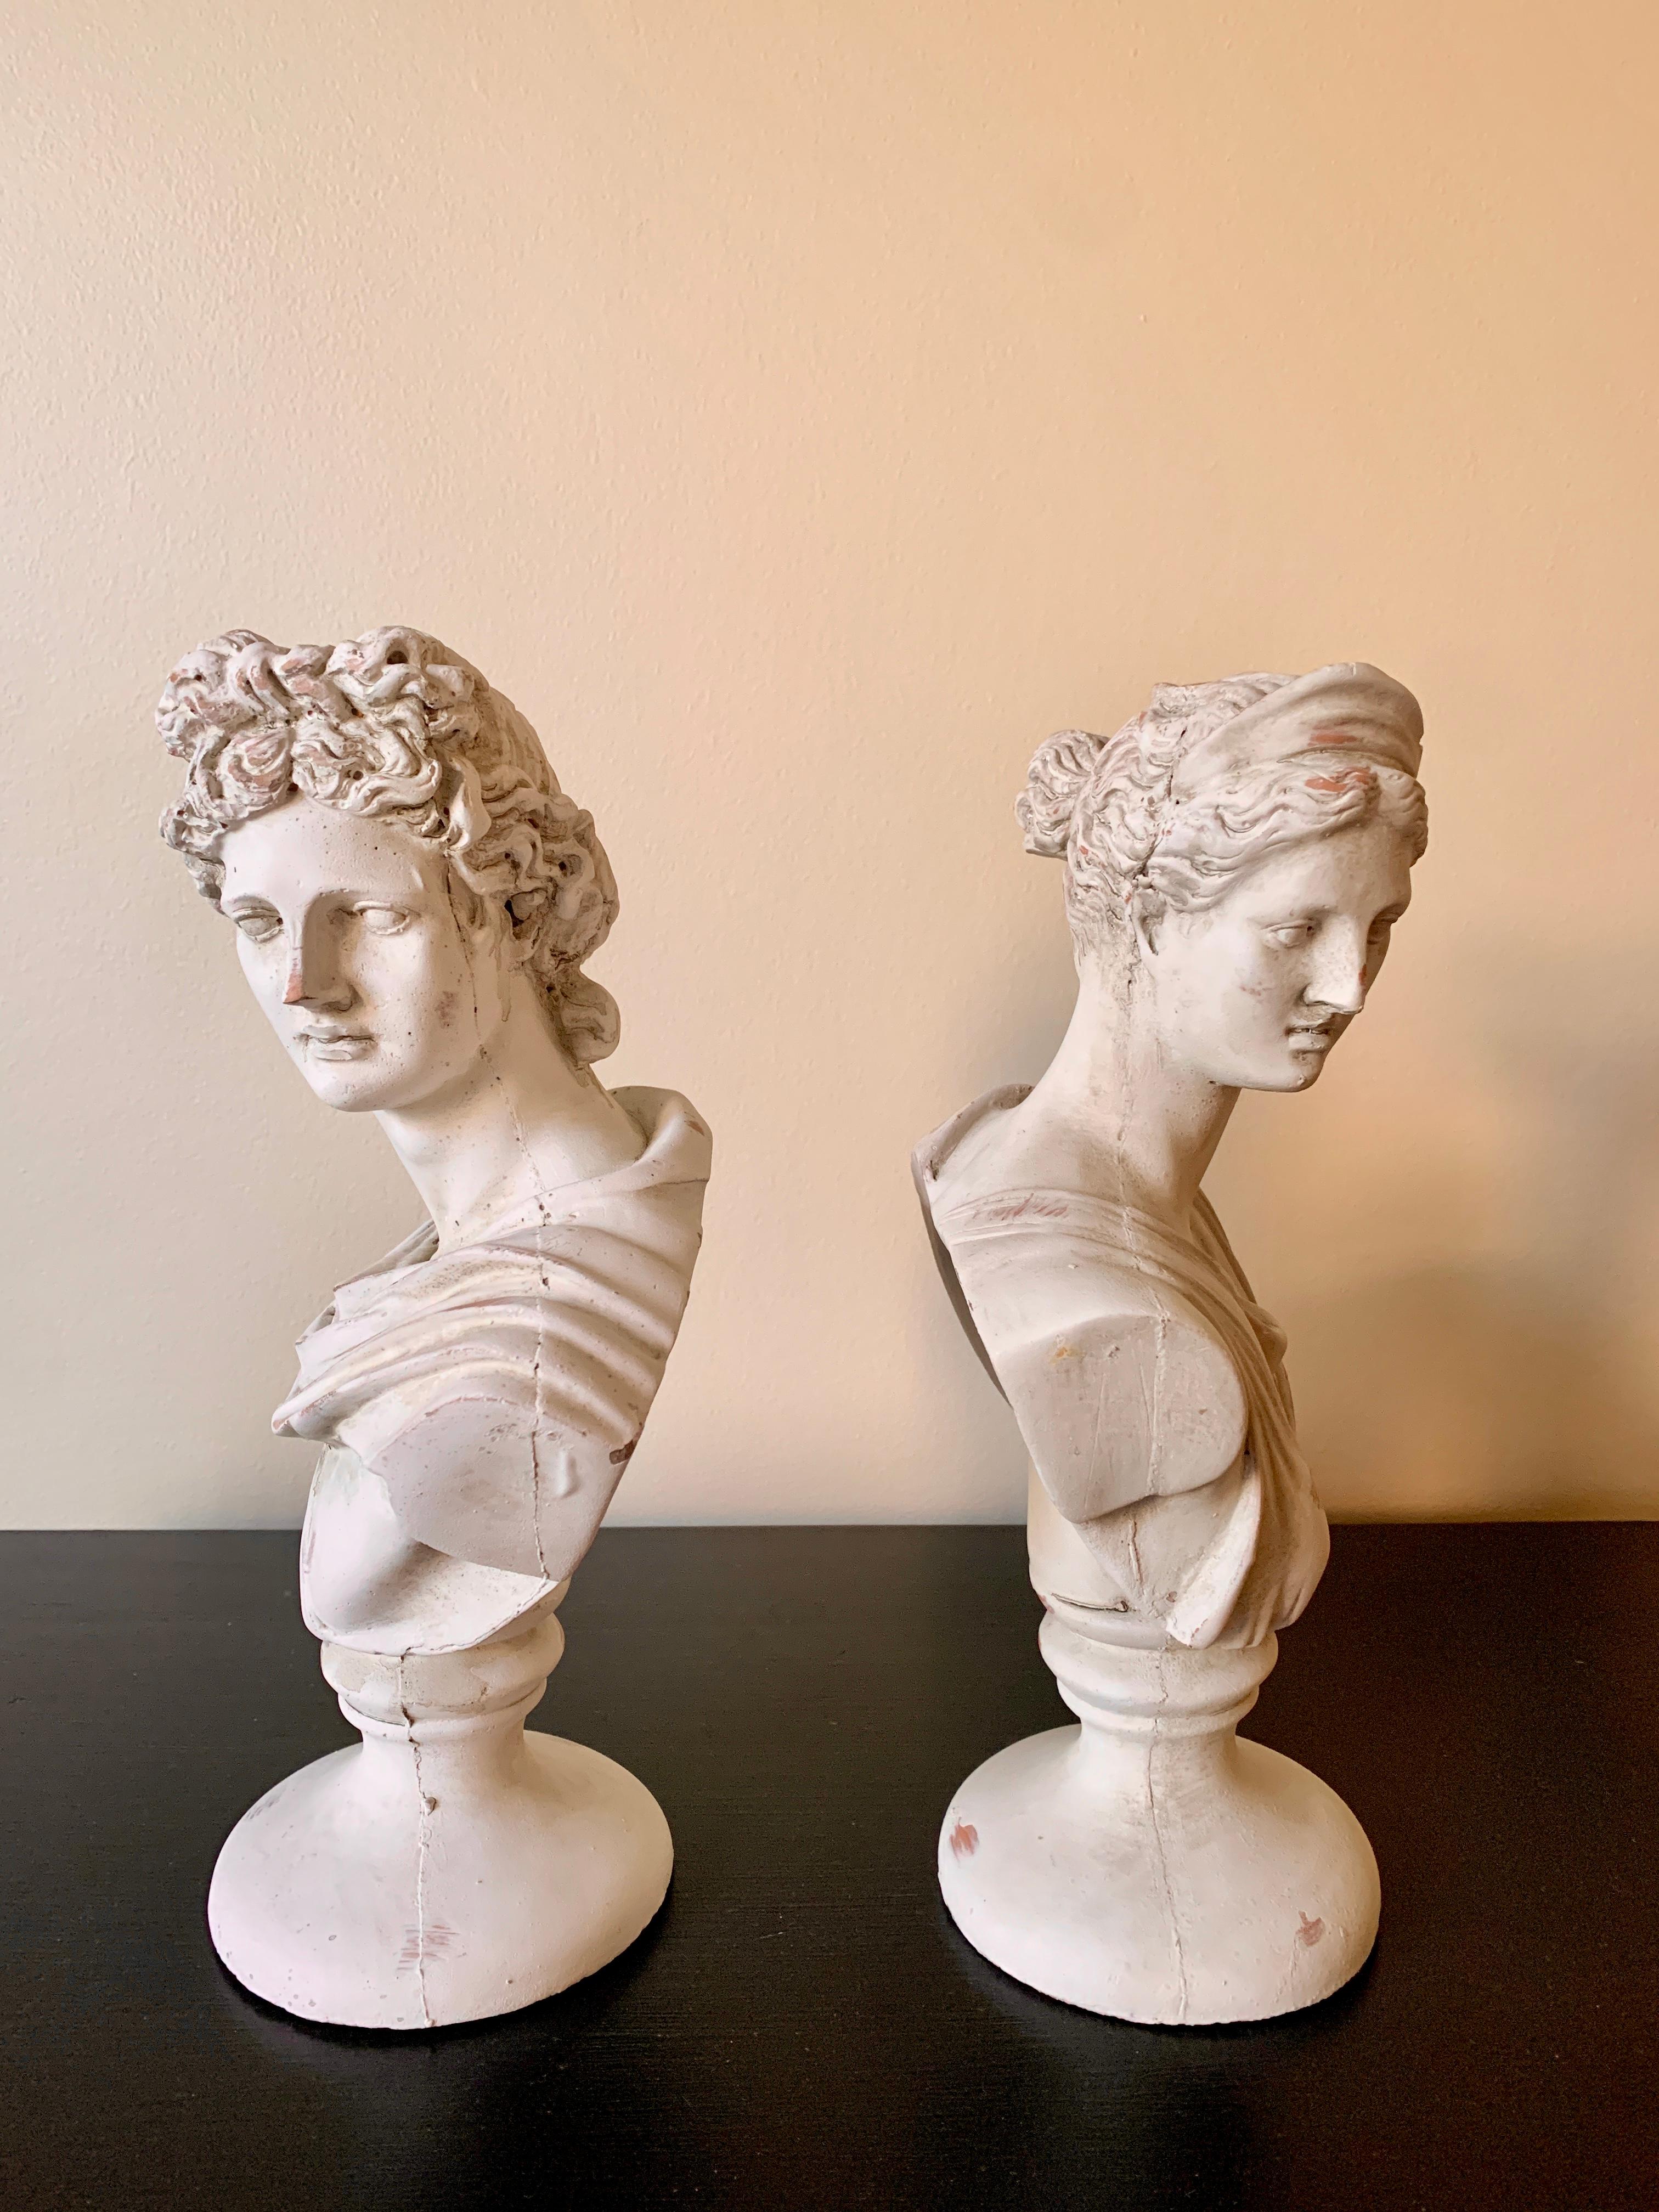 Contemporary Neoclassical Plaster Busts of Diana and Apollo Belvedere Sculptures, Pair For Sale